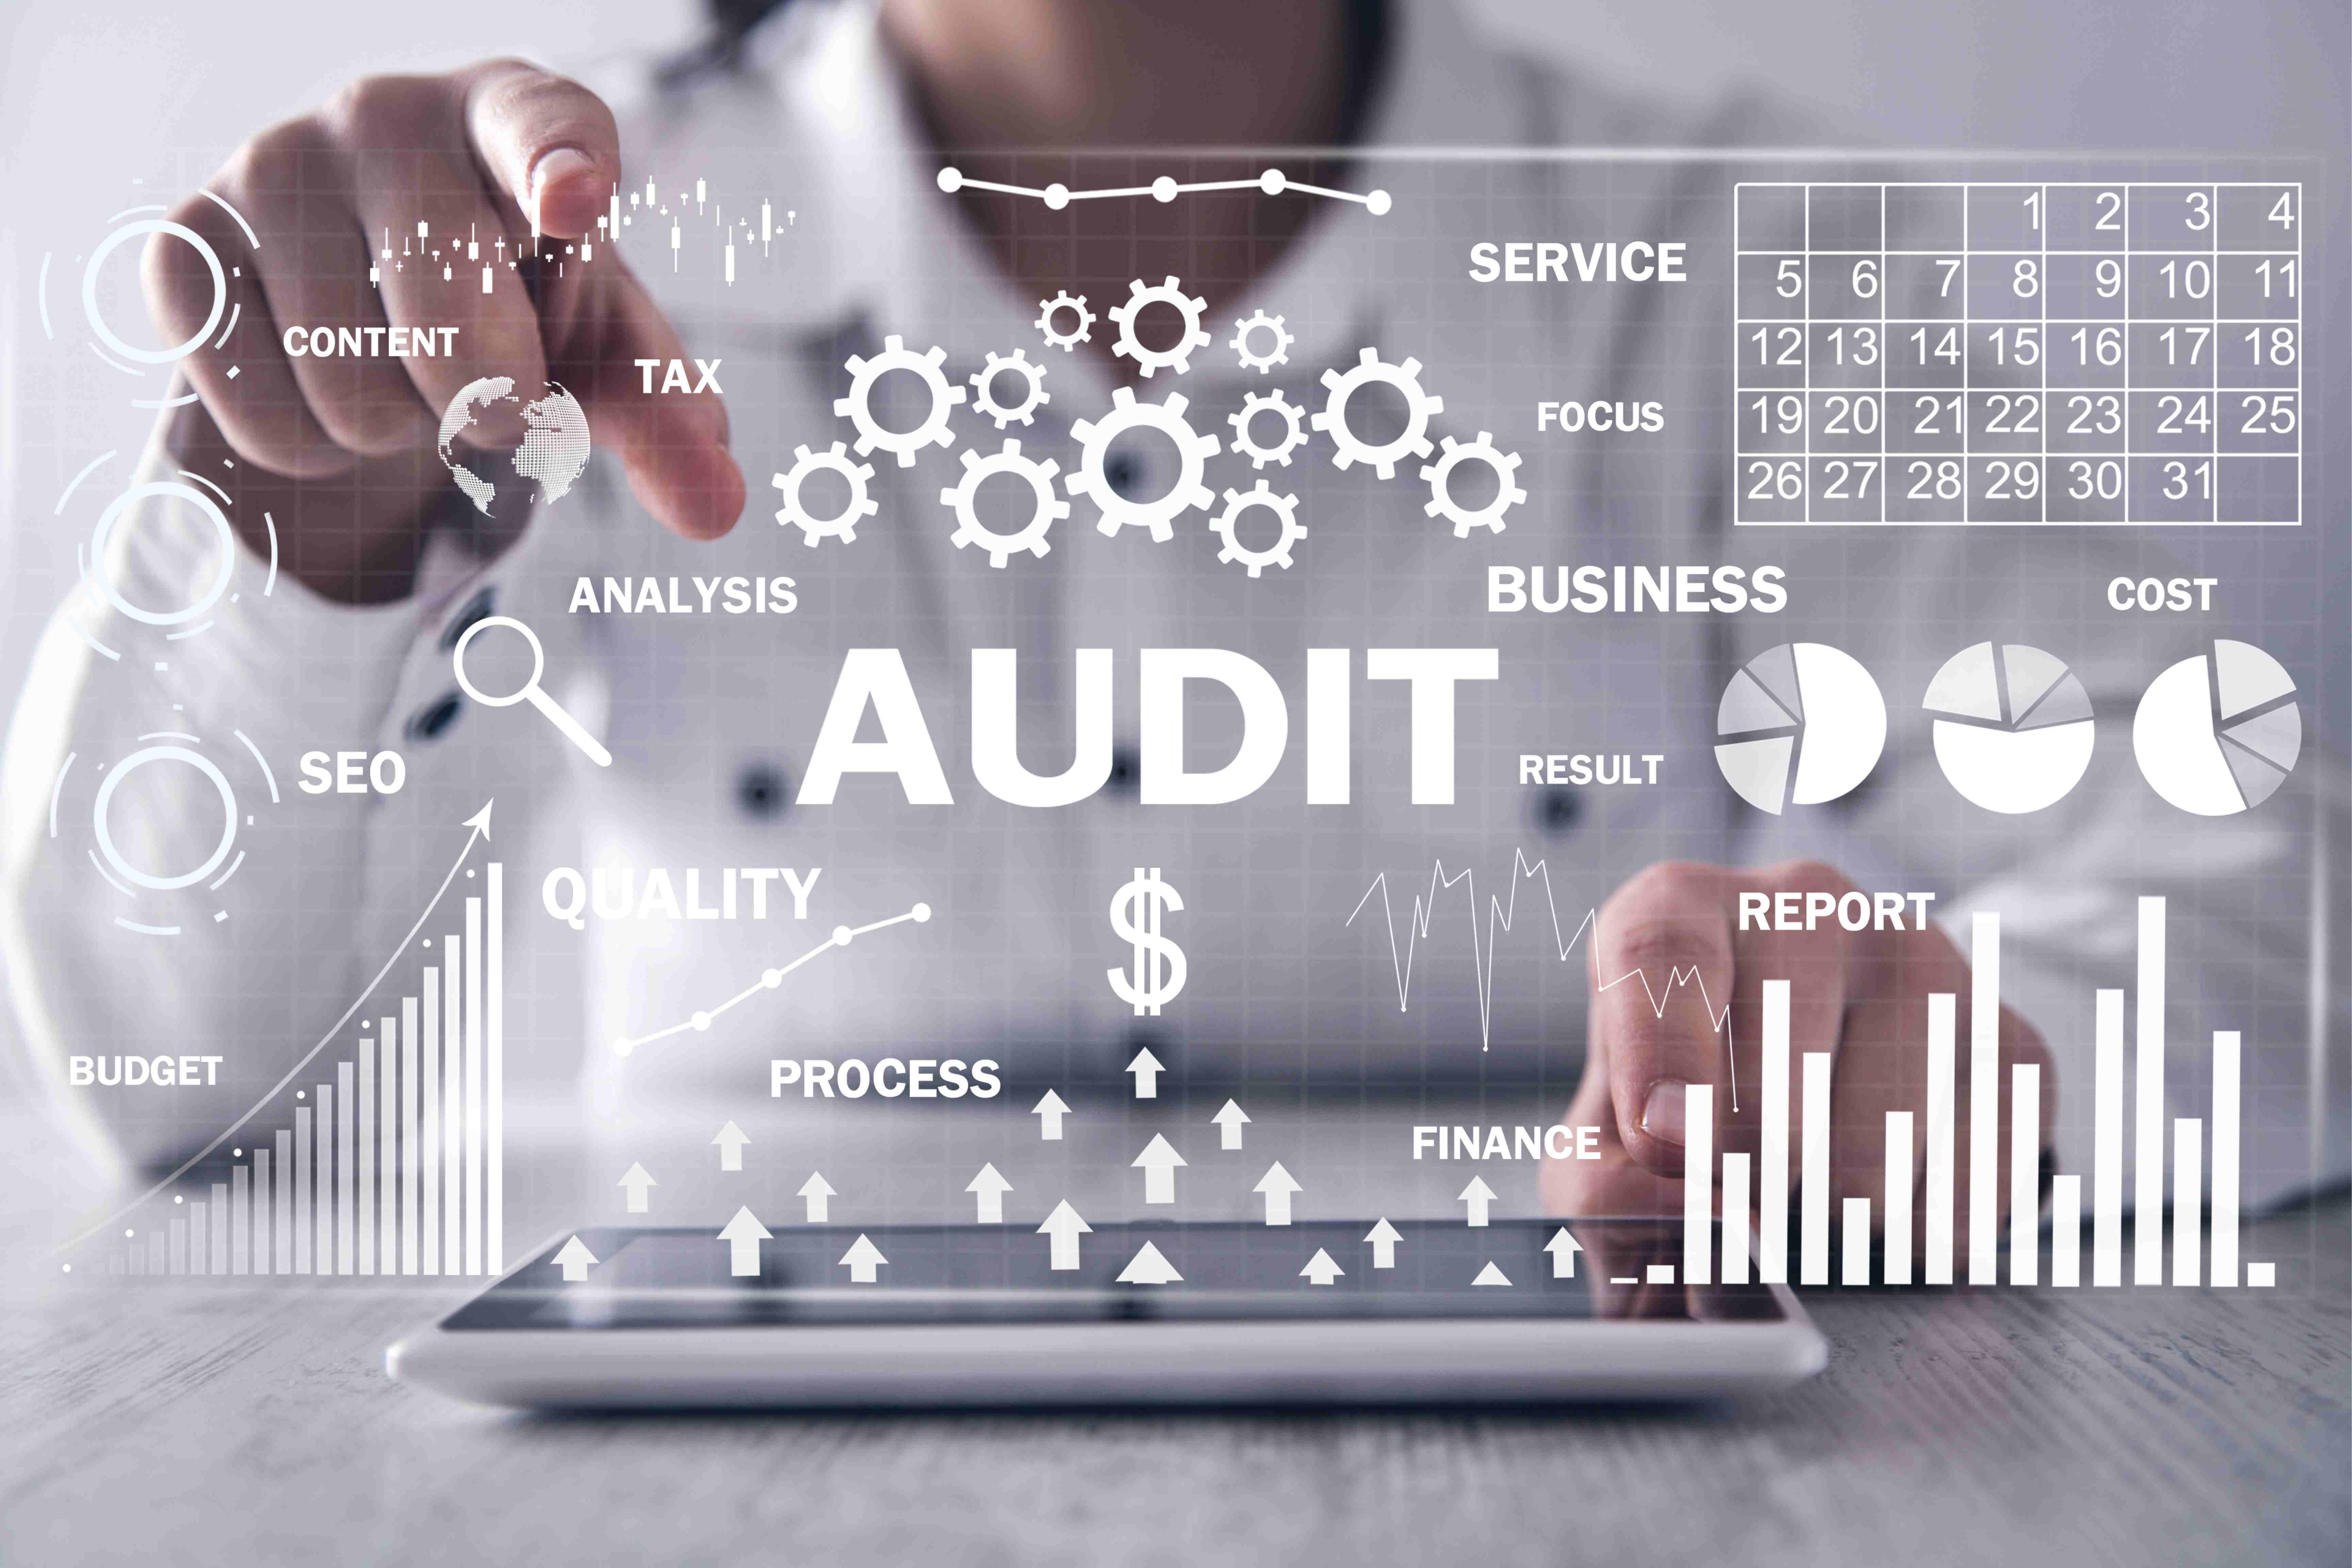 How to Conduct an SEO Audit: Step-by-Step Guide